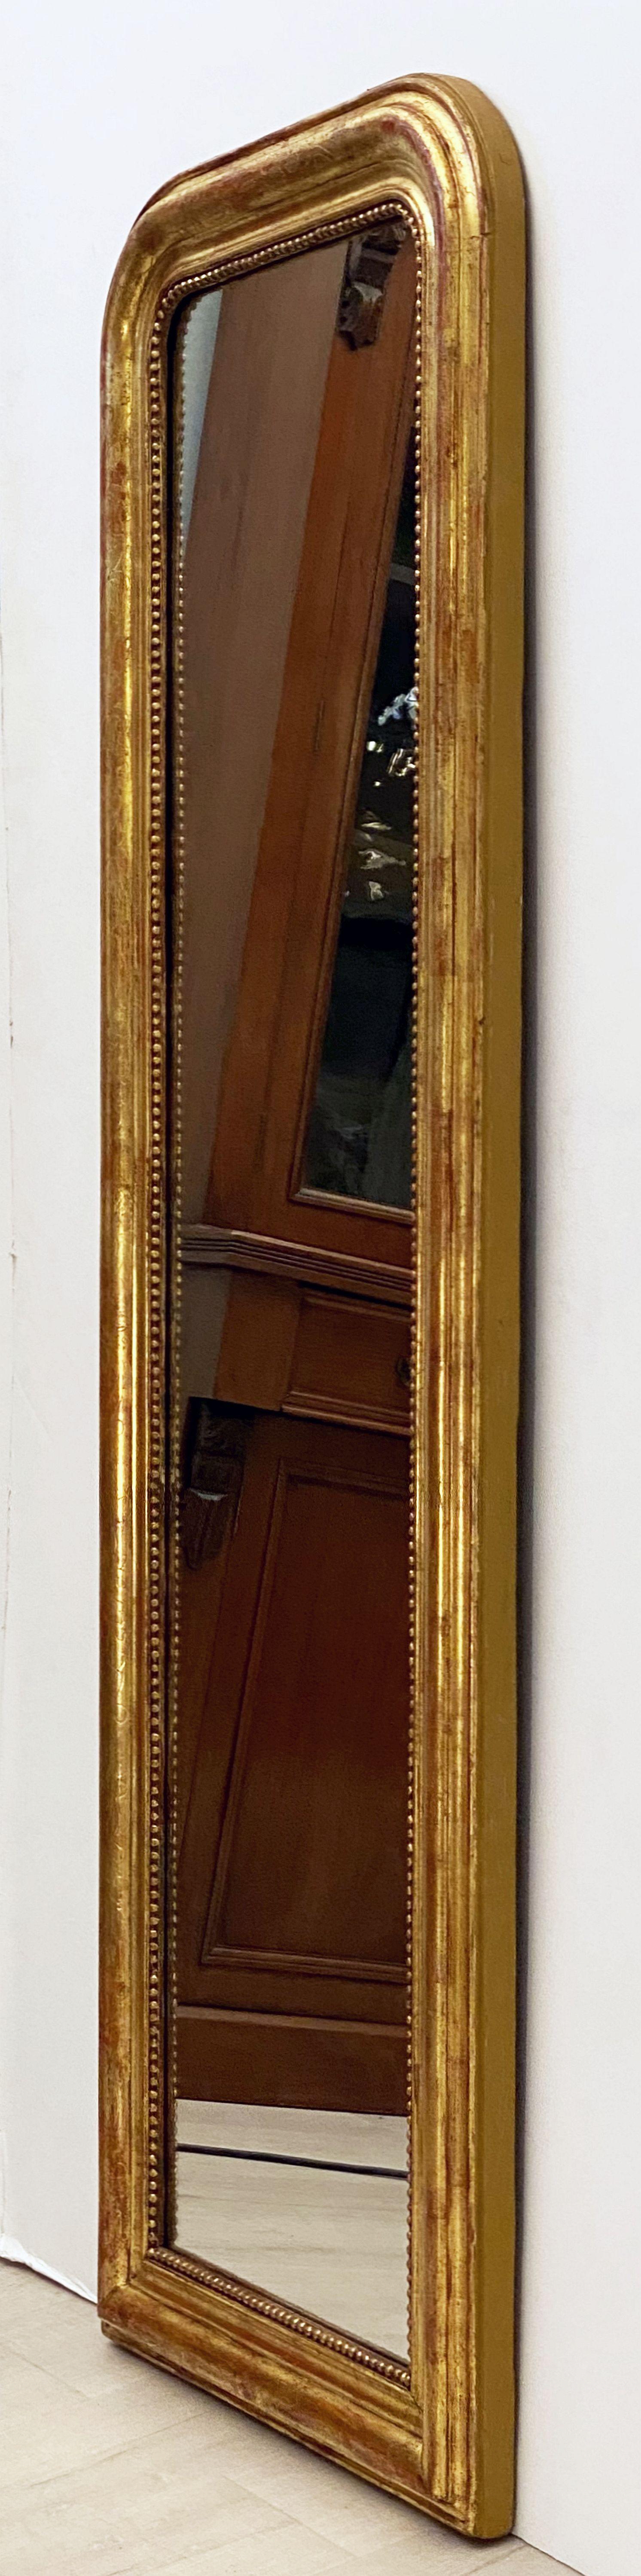 French Large Gilt Louis Philippe Arch Top Wall or Floor Mirror (H 58 1/2 x W 19 1/2)